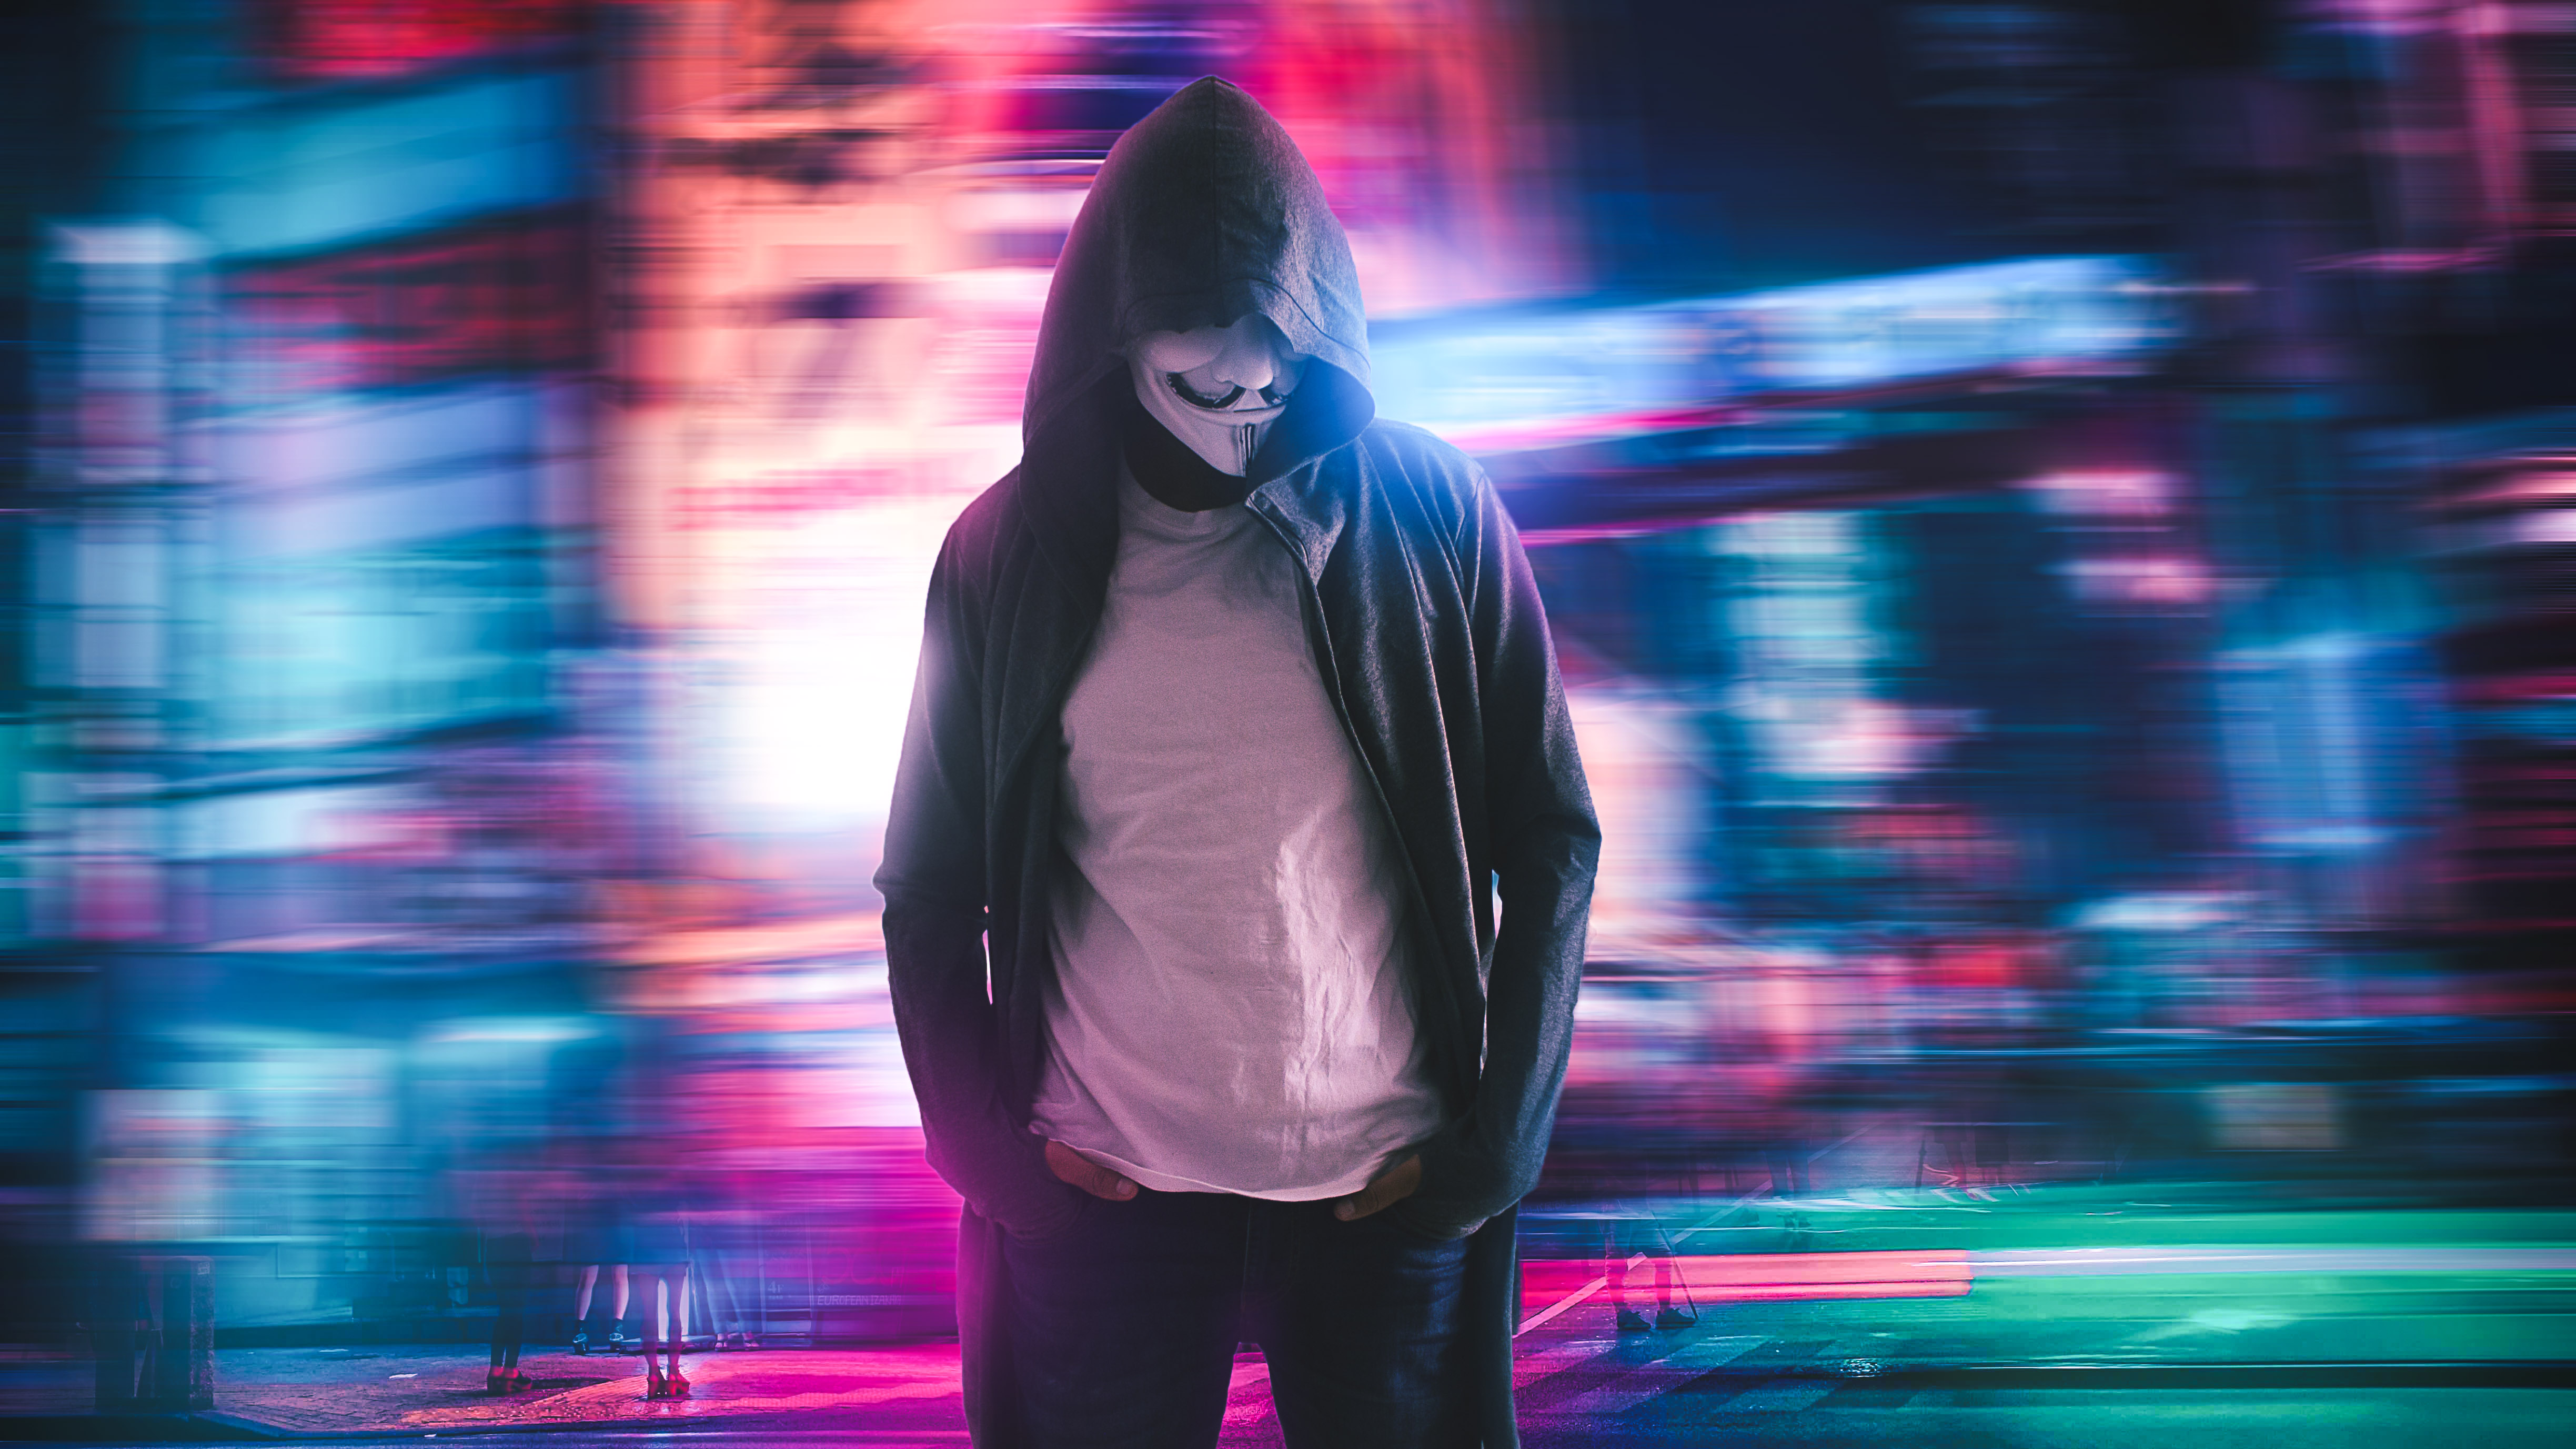 Download Masked Man, Anonymous, Hoodie, Hacker, Neon City - Ultra Hd